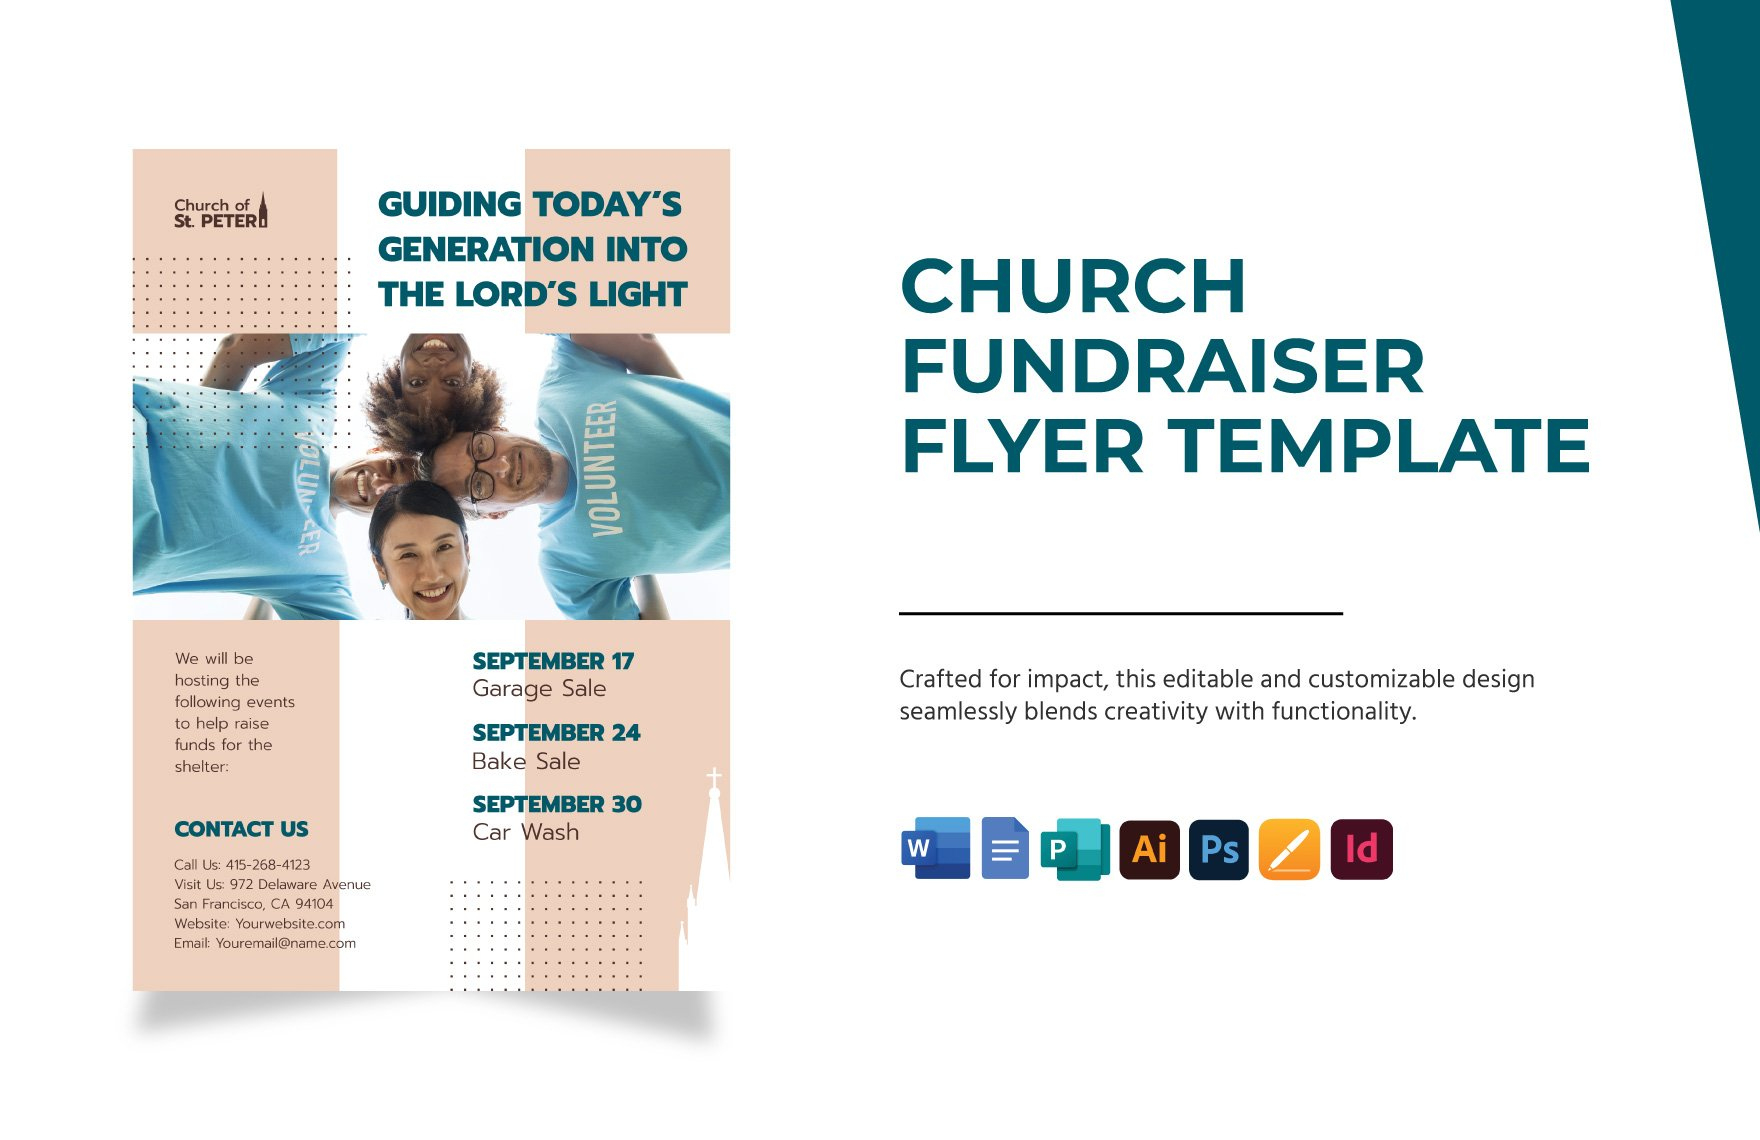 Church Fundraiser Flyer Template In Illustrator, Word, Indesign in Free Printable Flyers For Church